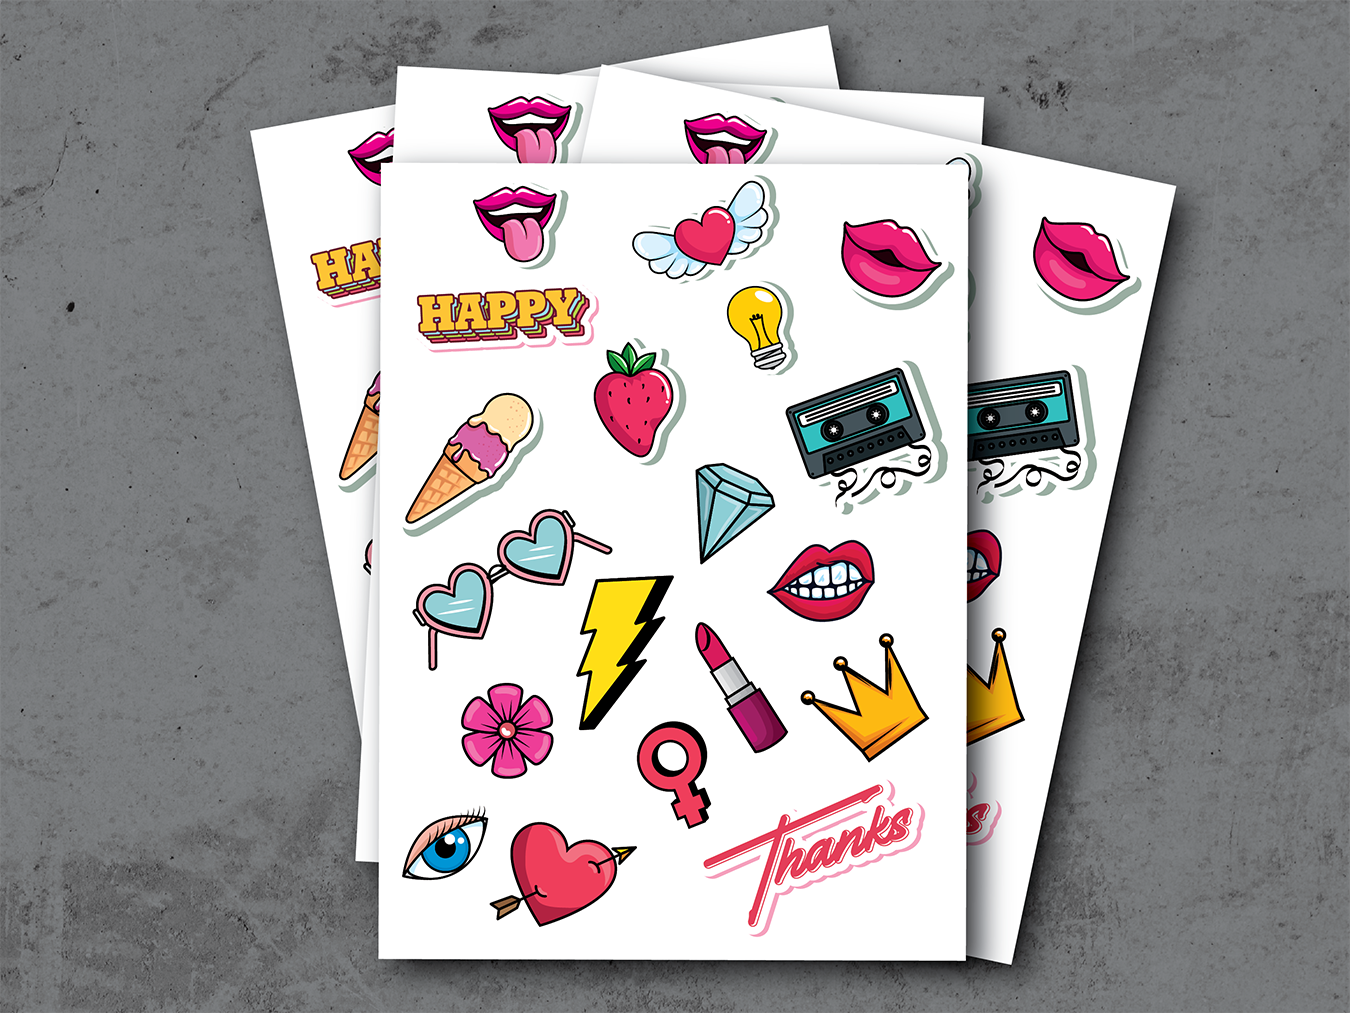 Kiss Cut Vs Die Cut Stickers — What's The Difference?